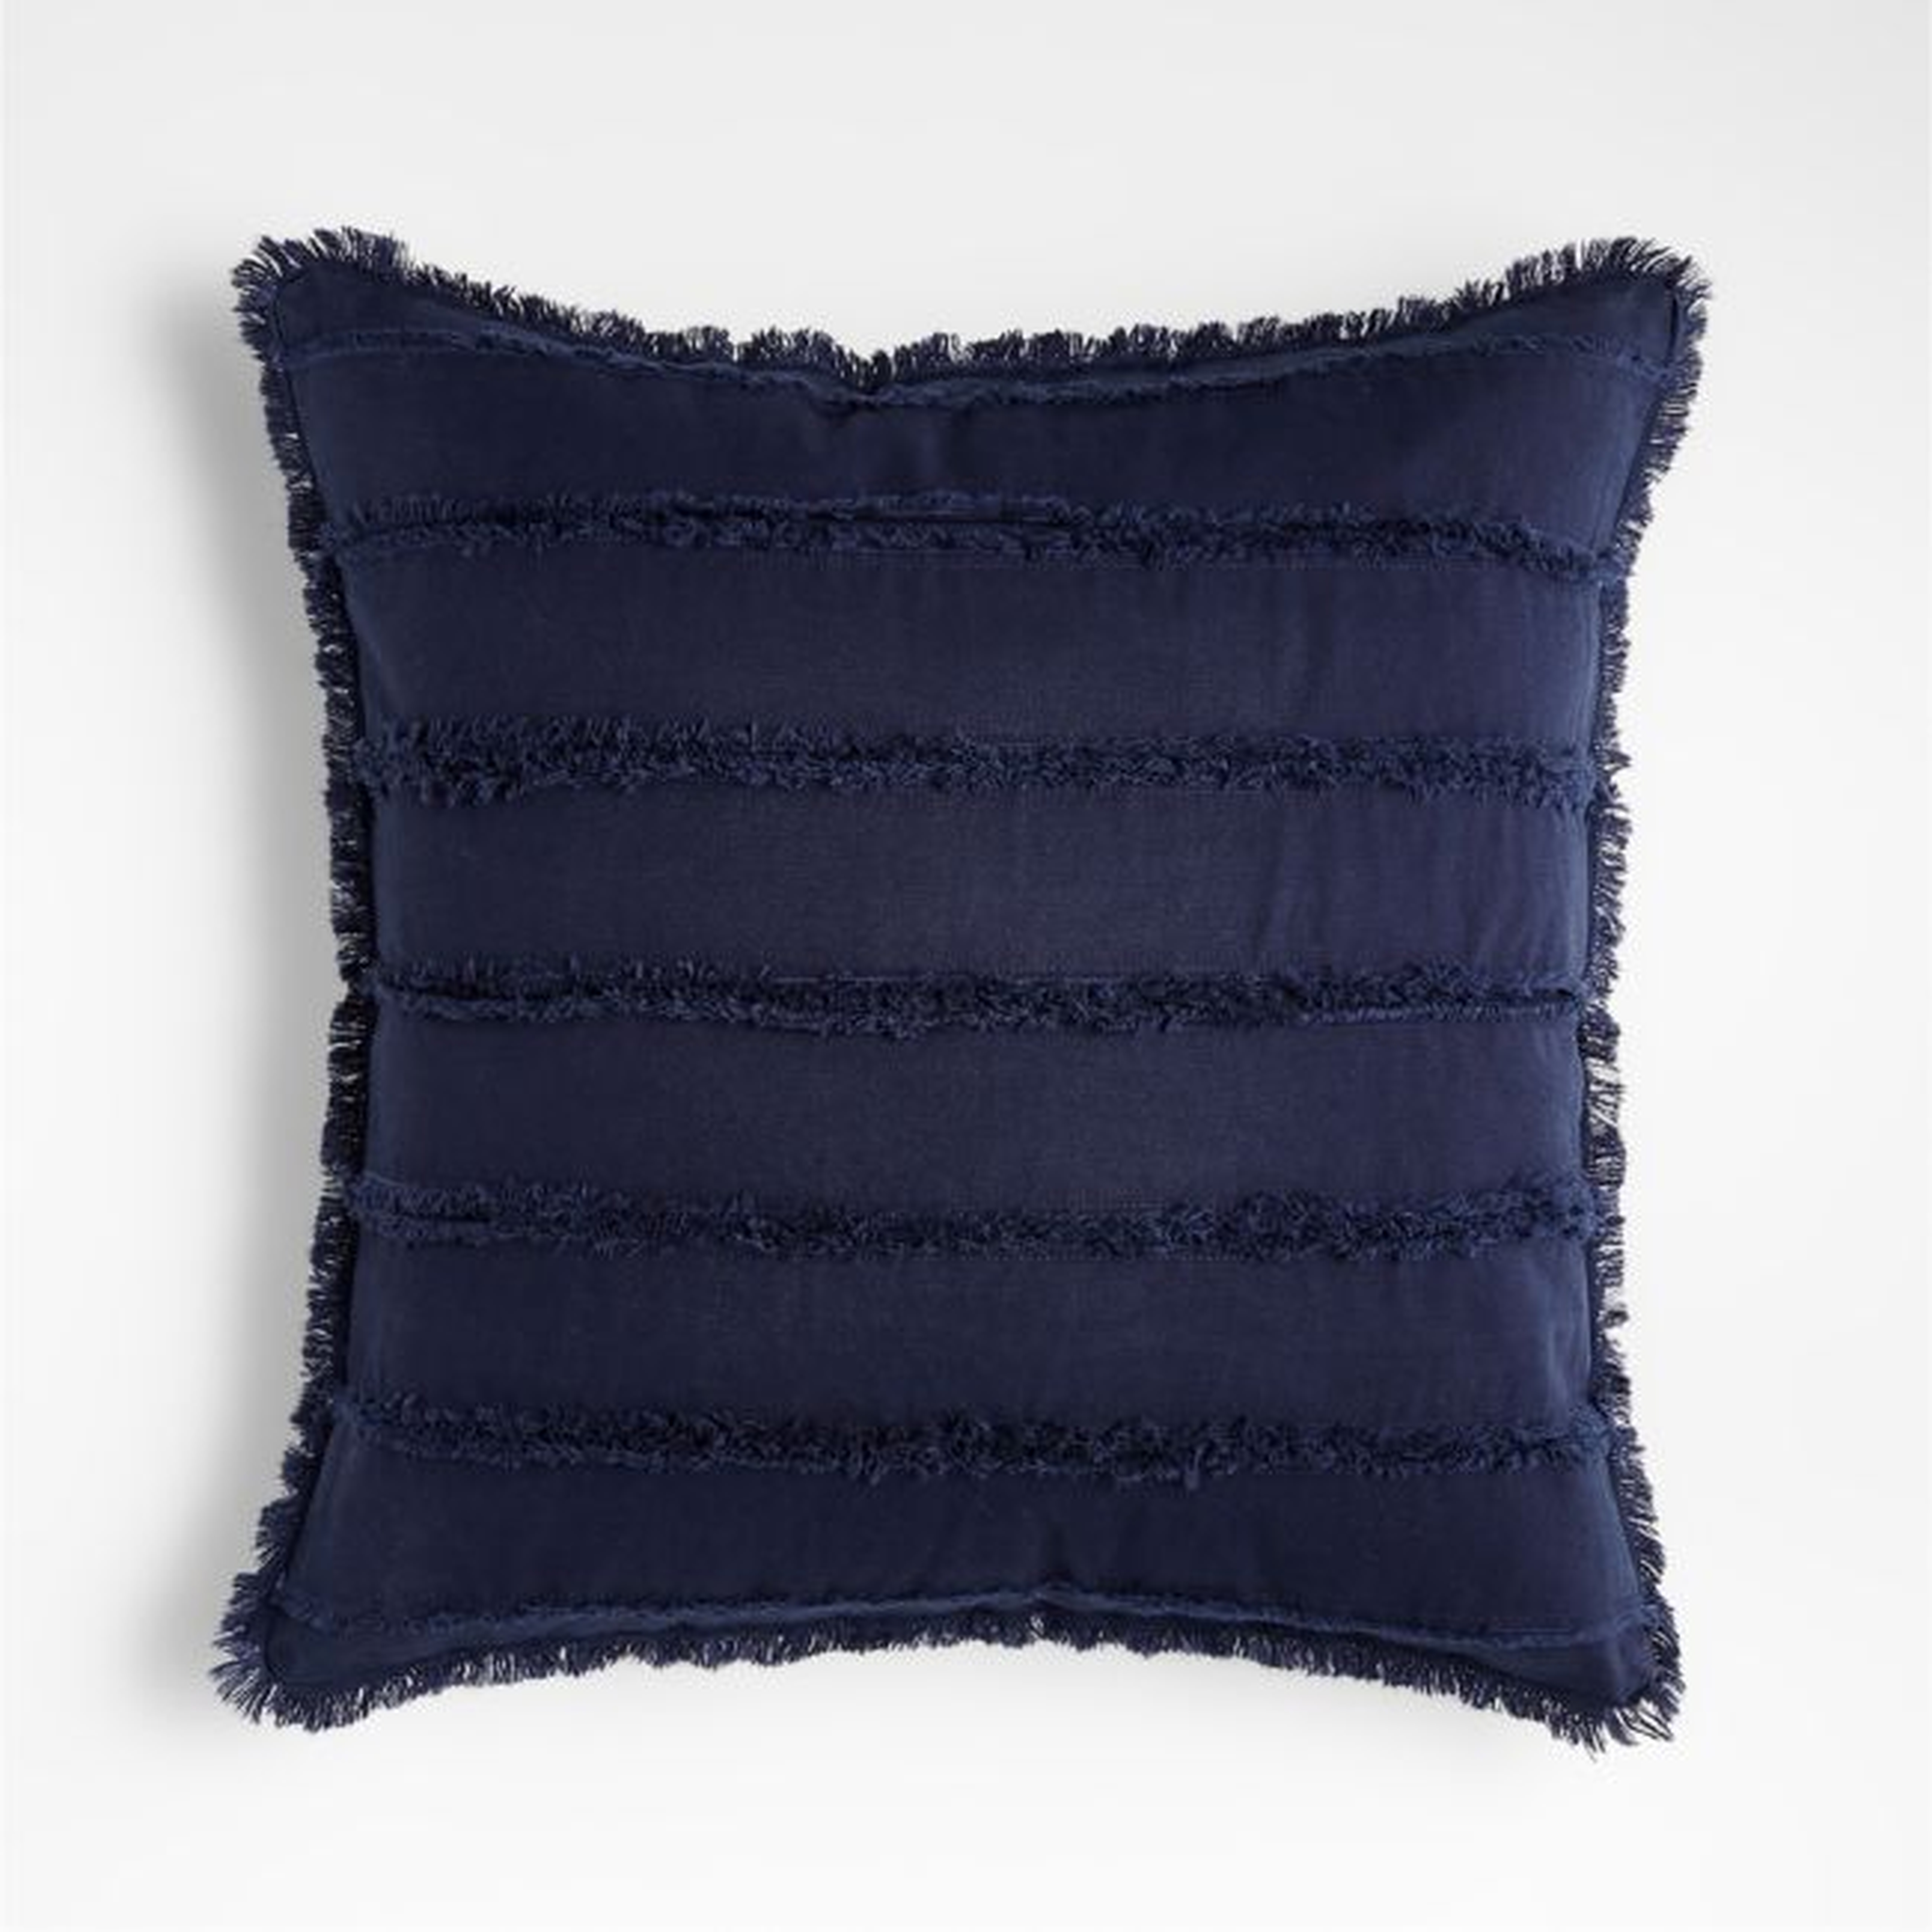 Denim 20" Indigo Blue Pillow Cover with Feather-Down Insert - Crate and Barrel